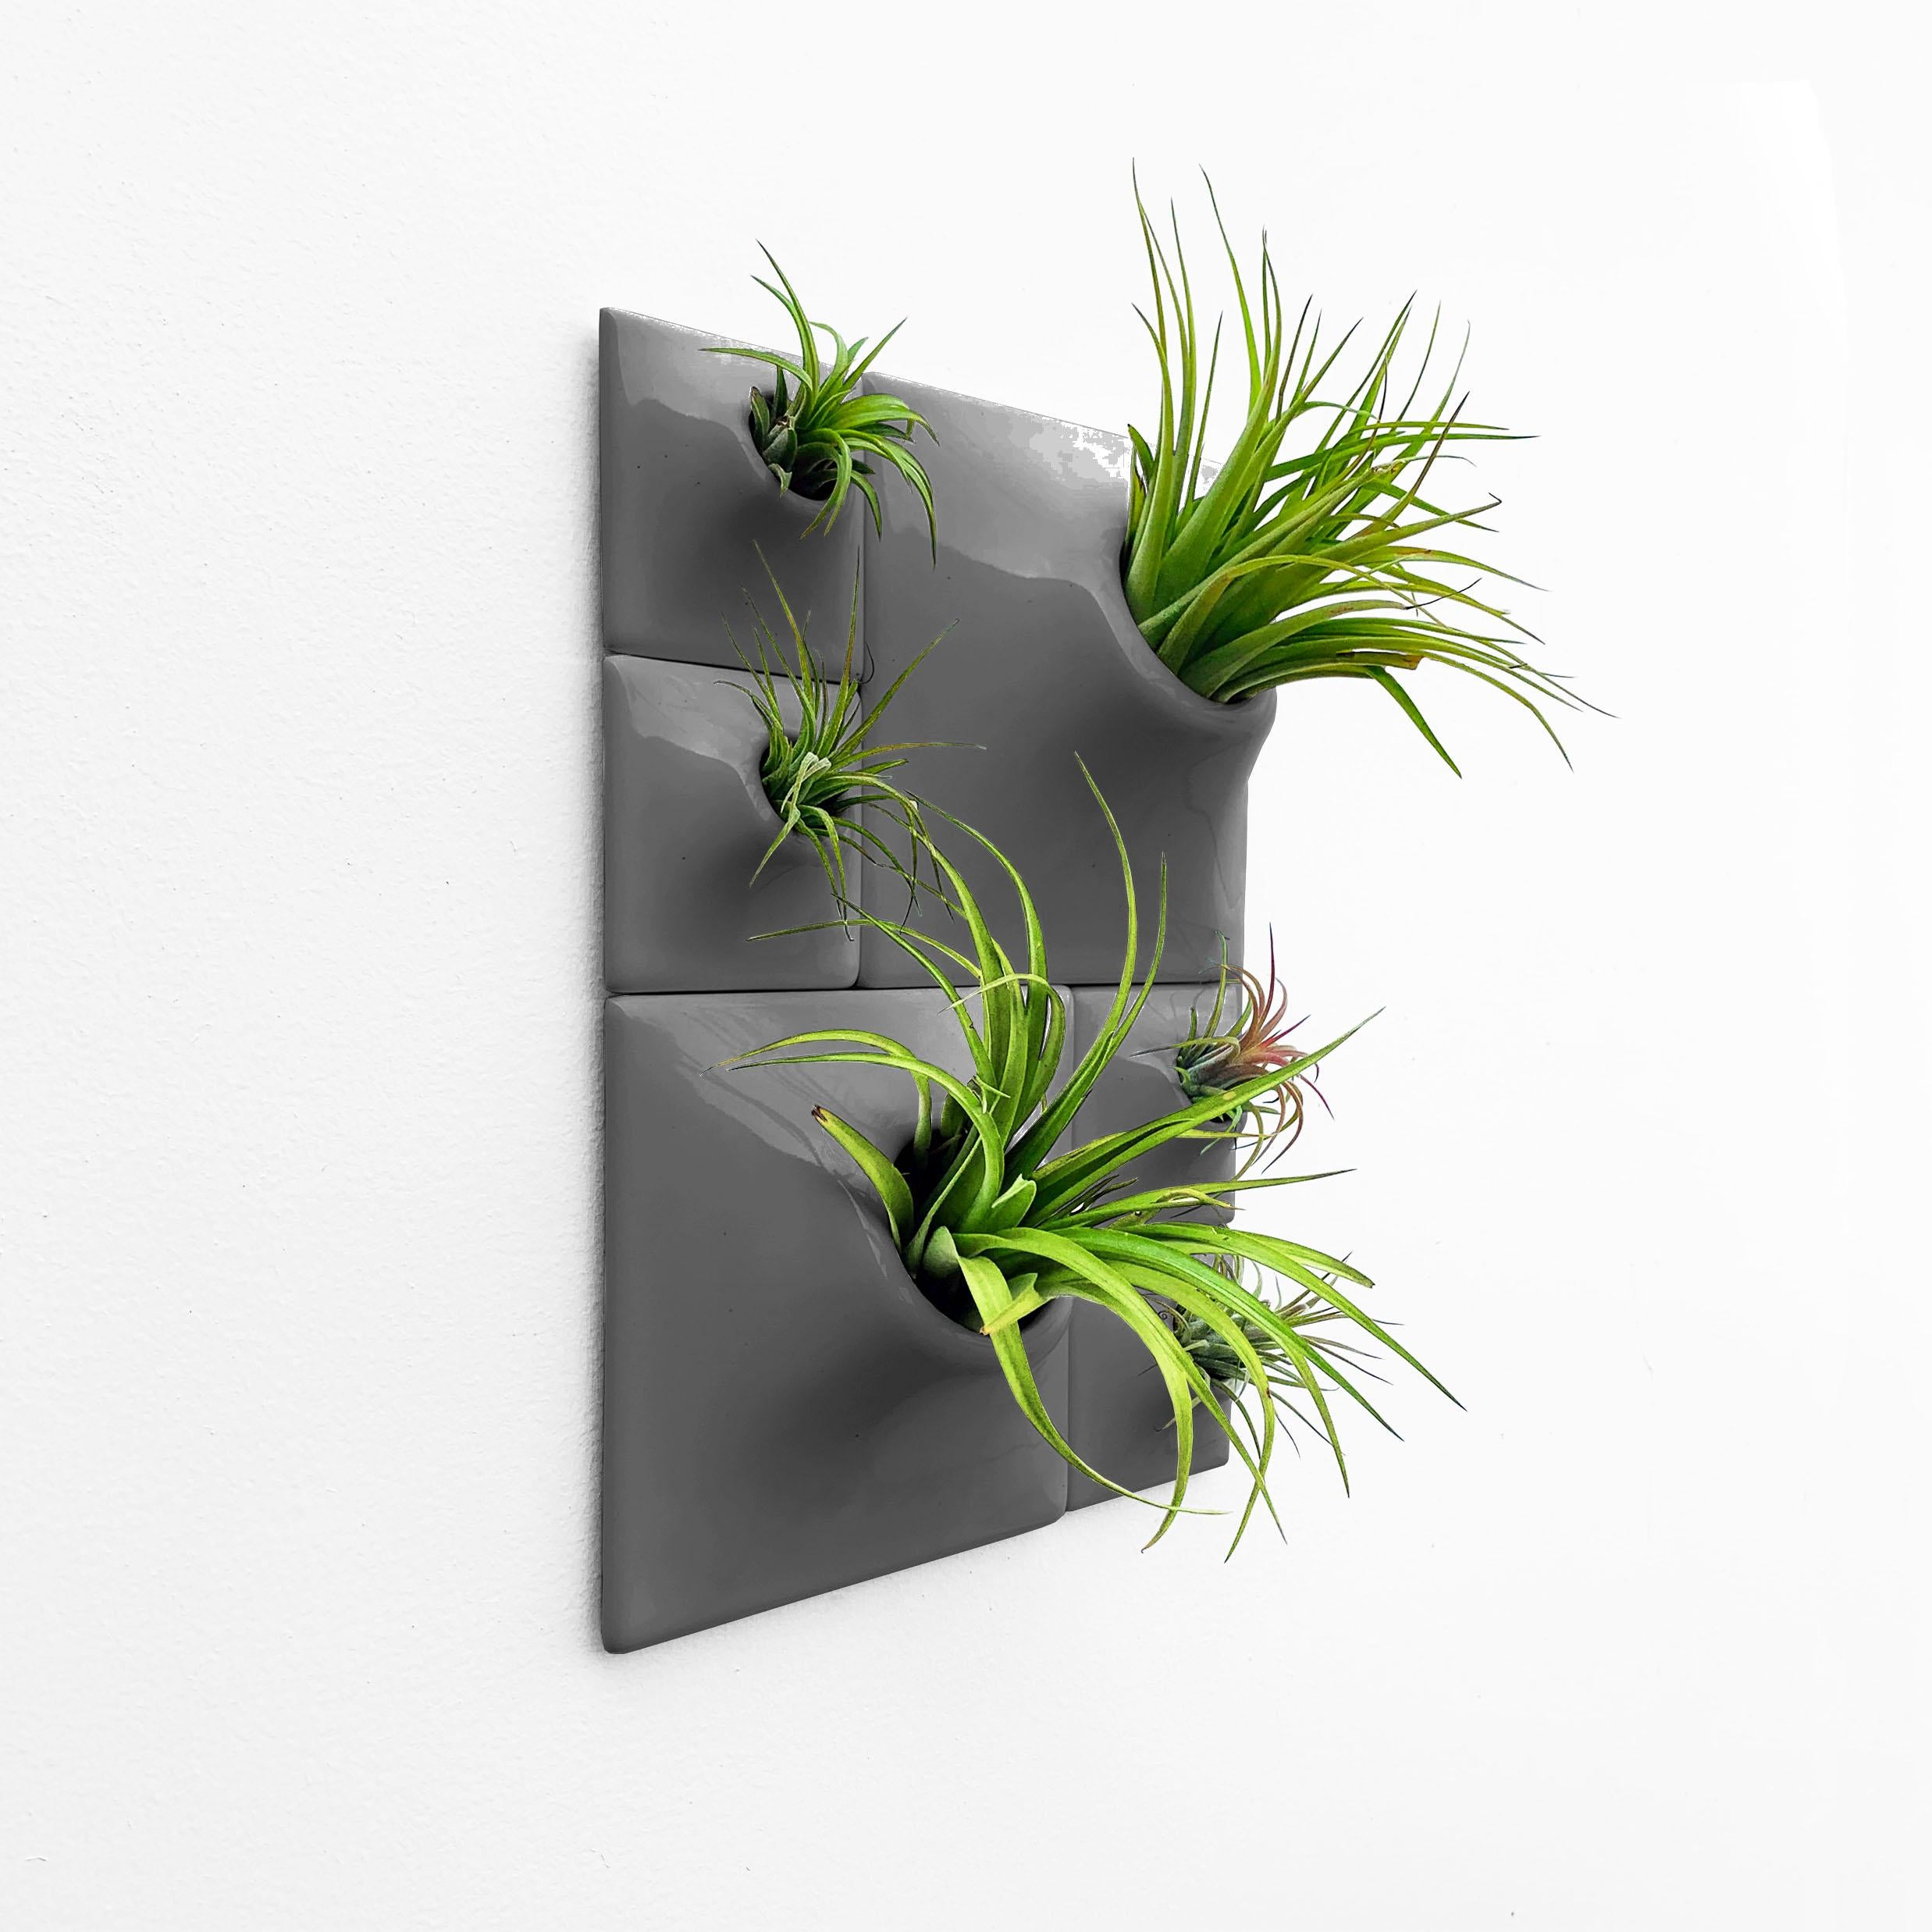 Modern Gray Wall Planter Set, Living Wall Sculpture, Moss Wall Art, Node BR2D

Add a breathtaking modular plant wall or modern moss wall to any space with this eye catching Node Wall Planter set.  Elevate your home decor with living modern wall art